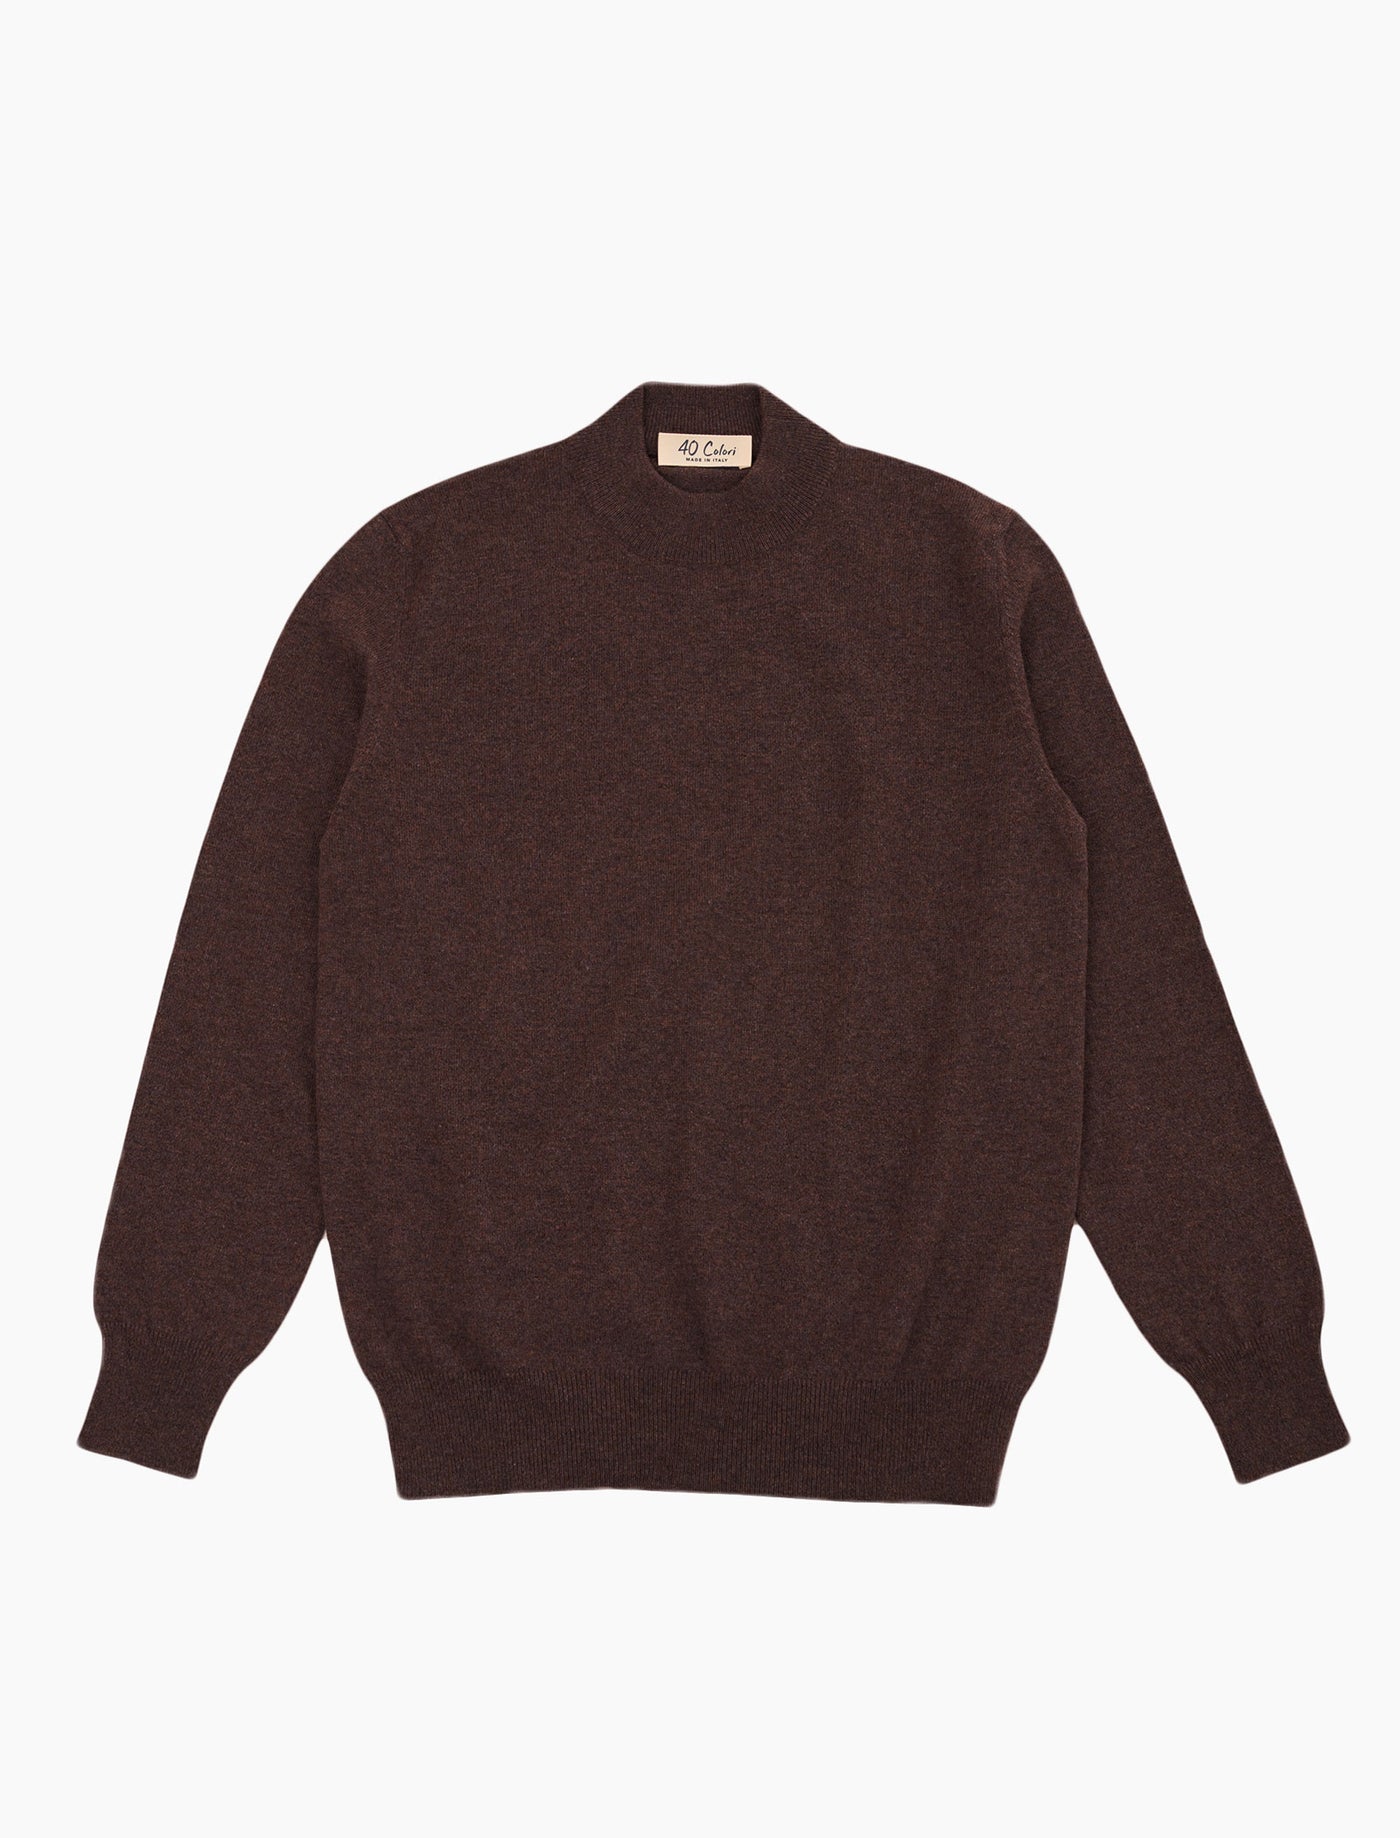 Men's Knitwear | Colourful Wool & Cashmere Jumpers | 40 Colori